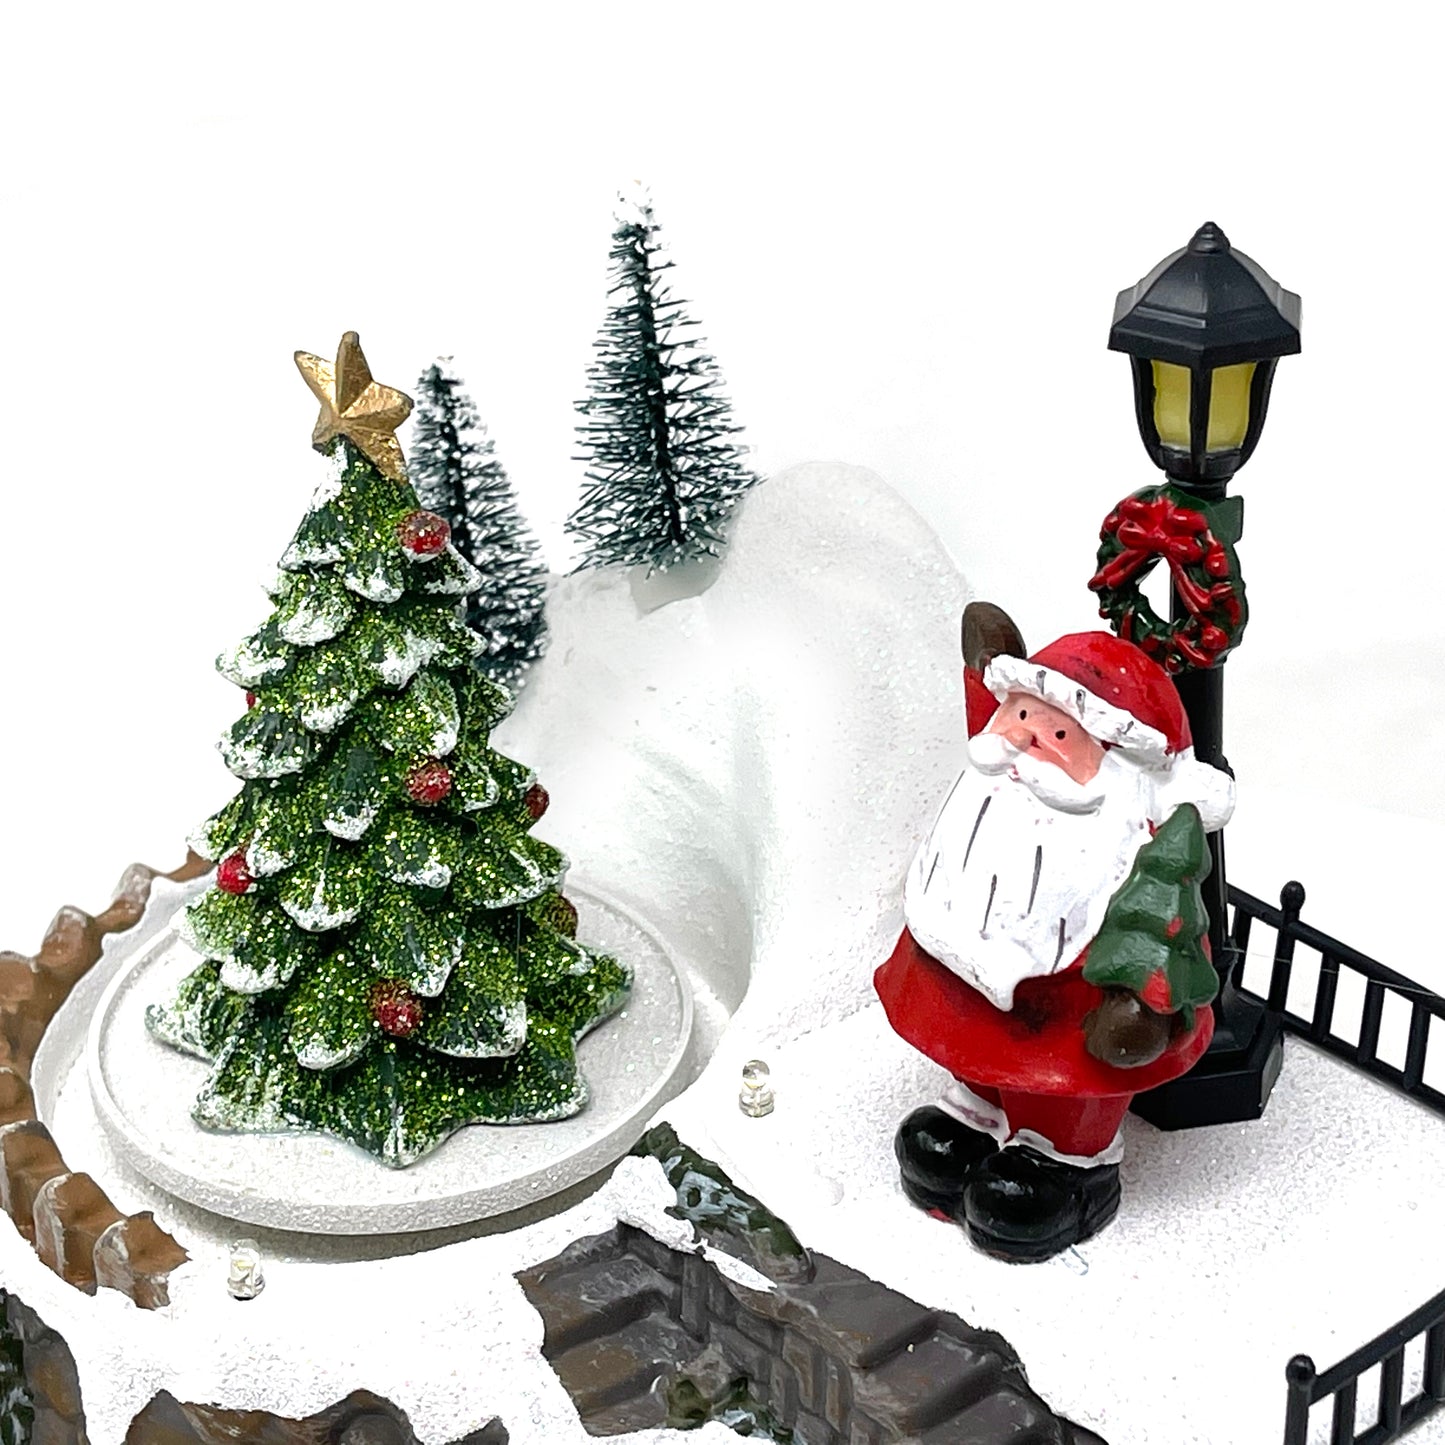 Crafted Polyresin Christmas House Collectable Figurine with USB and Battery Dual Power Source-Santa and Tree-XH93416